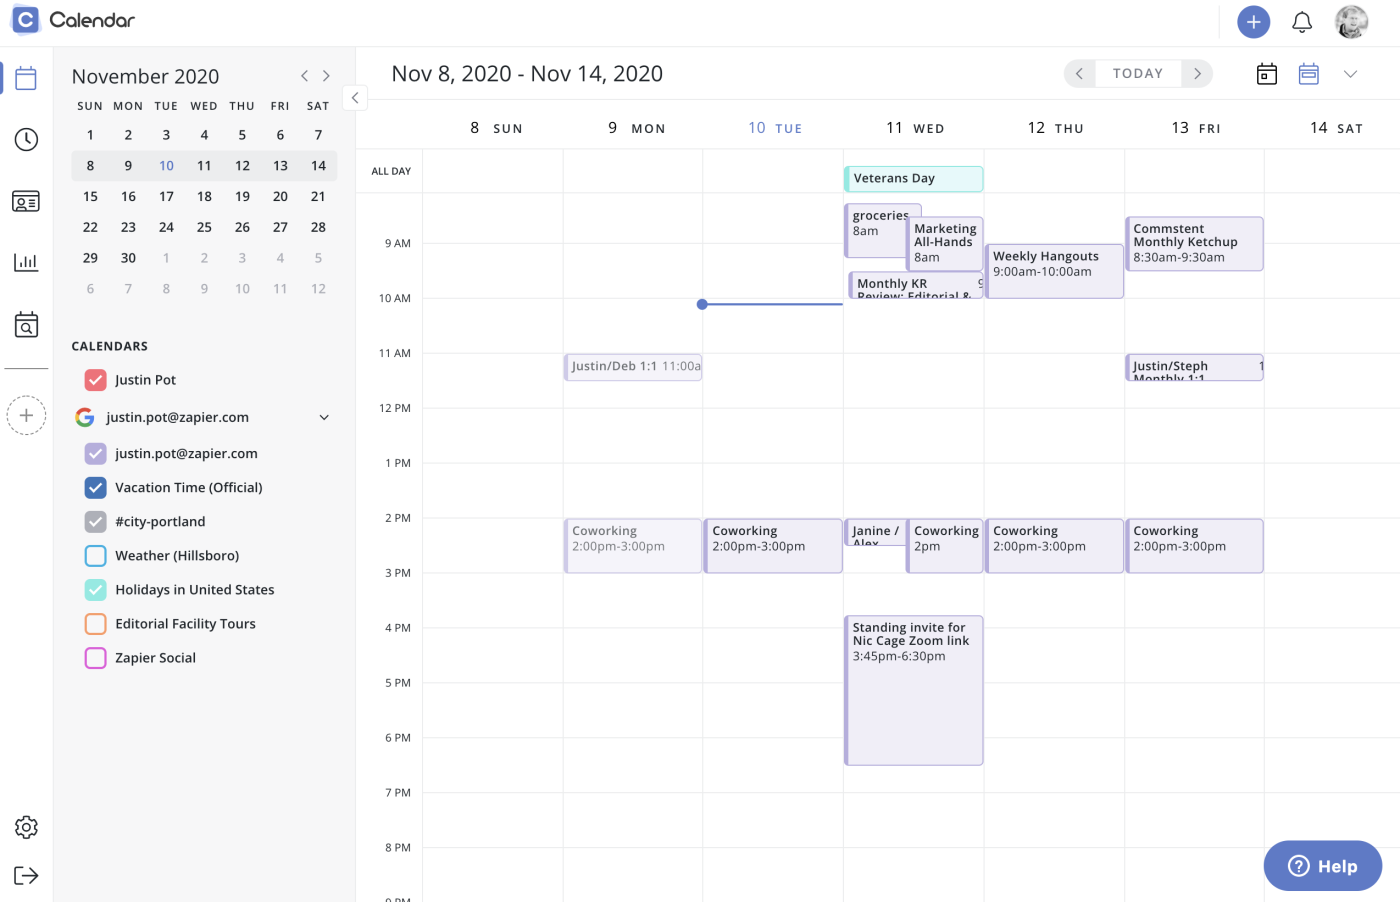 Calendar, our pick for the best calendar app for scheduling external appointments